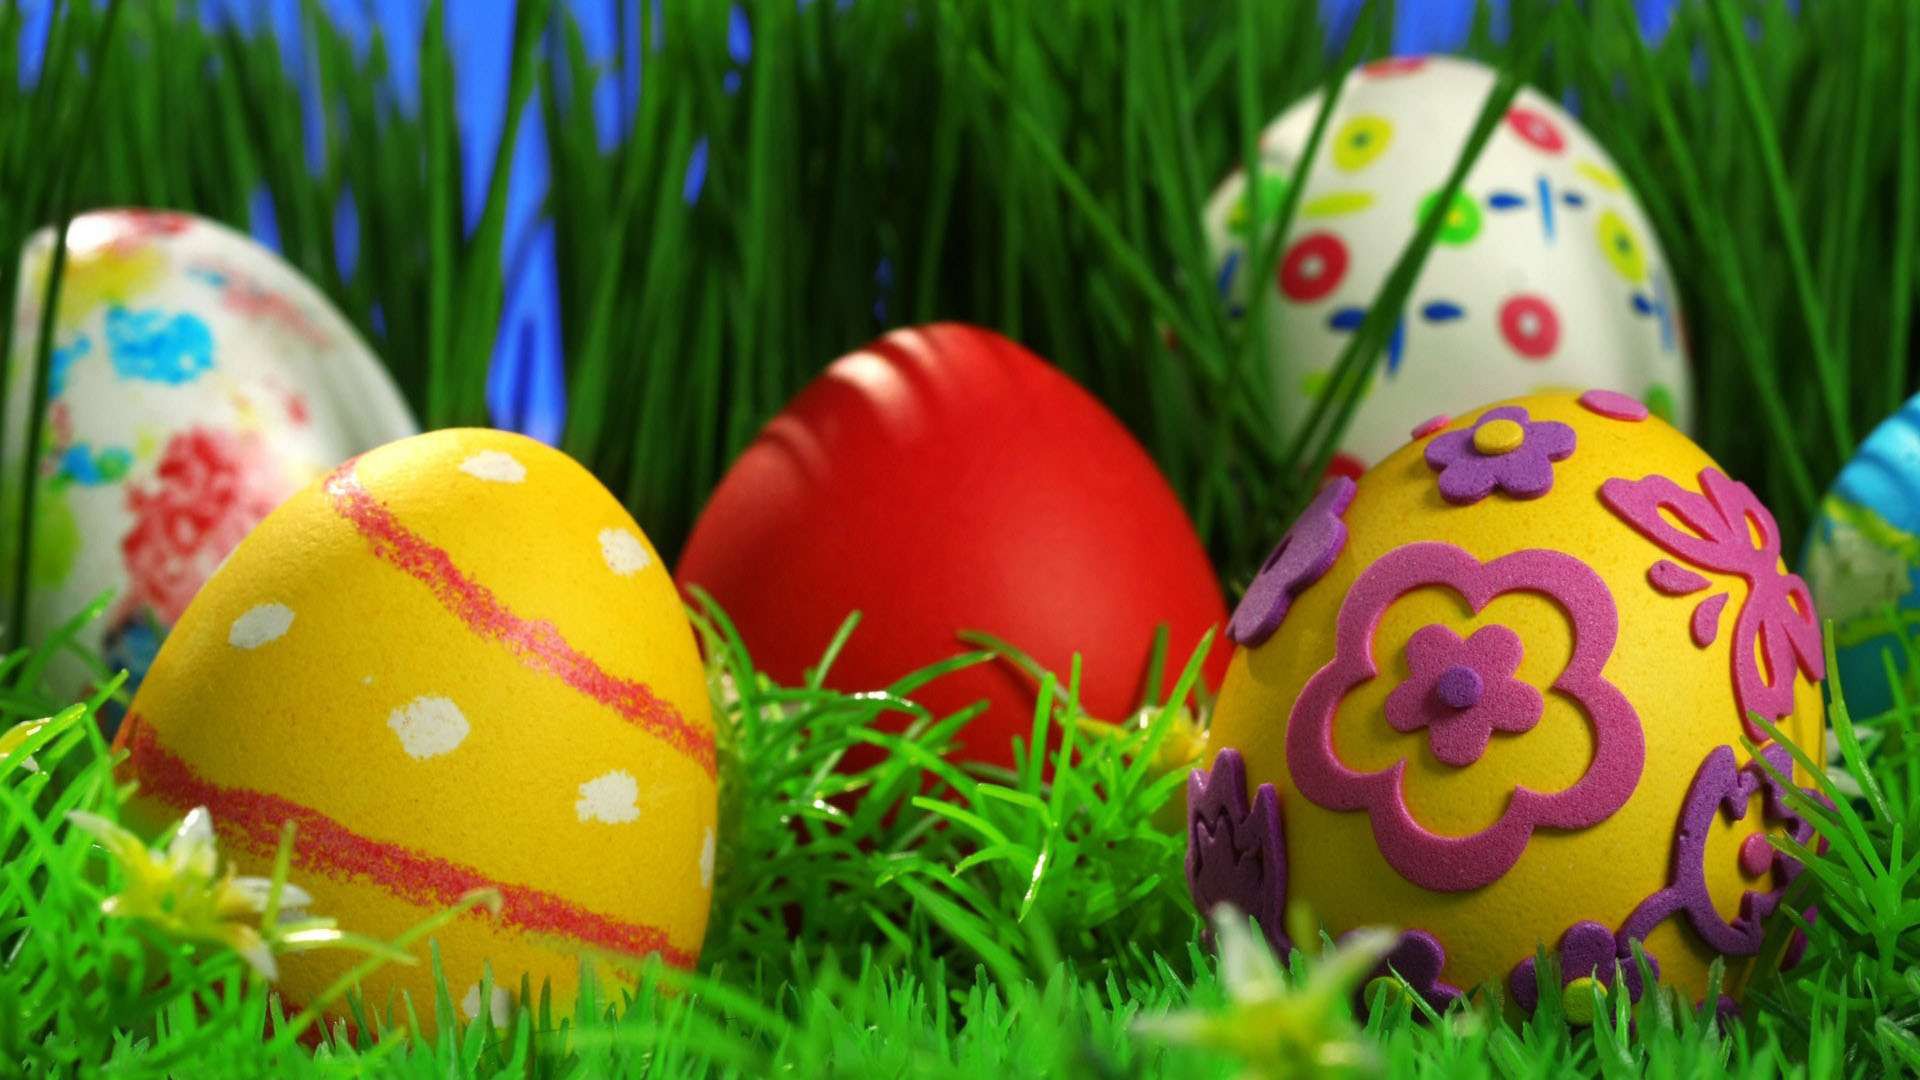 Decorated Easter Eggs Free Awesome Image For Mobile